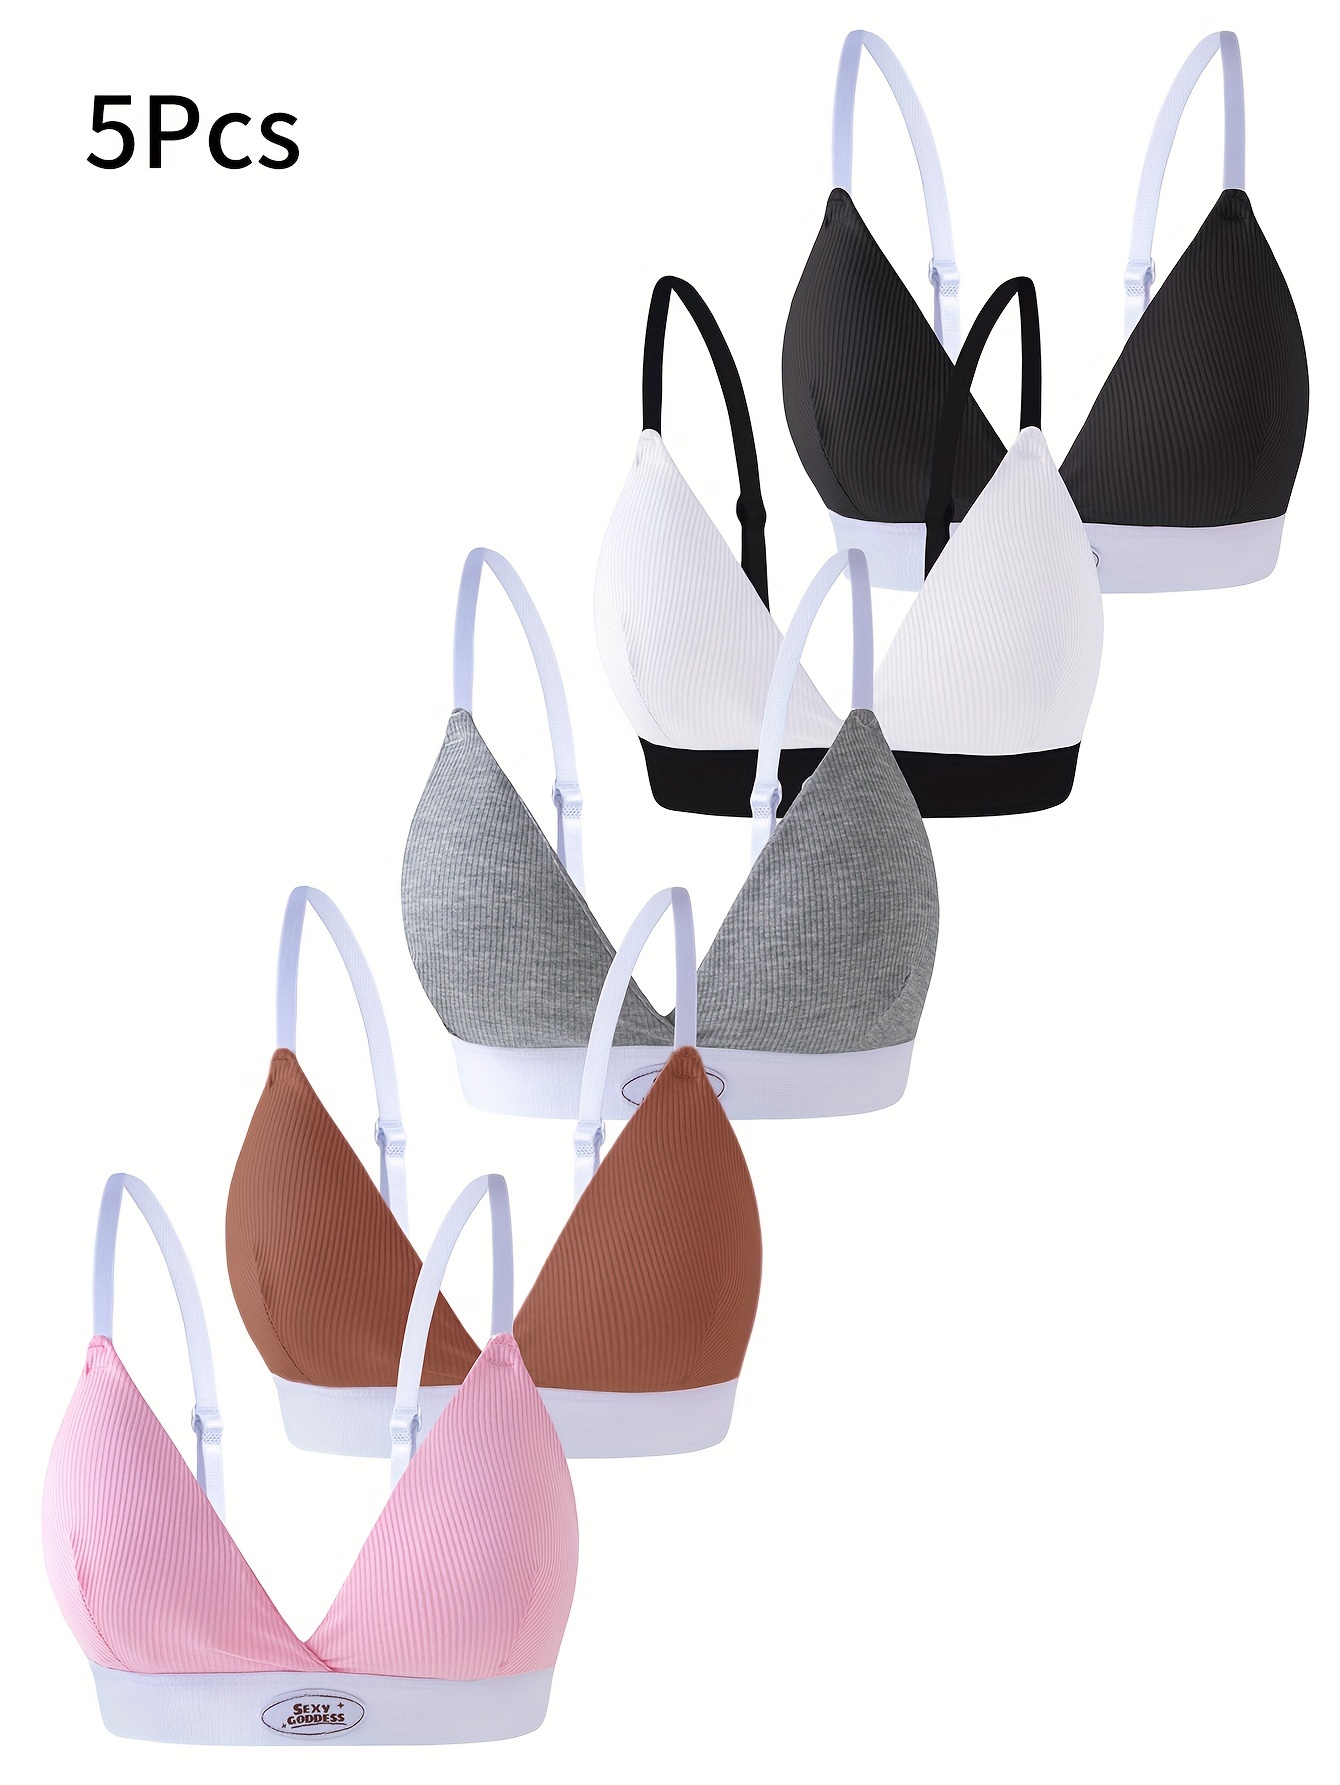 Bras for Women Underwire No Padding - Teenage Girls' Small Vests for  Primary School Students Comfortable Breather Everyday Wear Bras(2-Packs) 